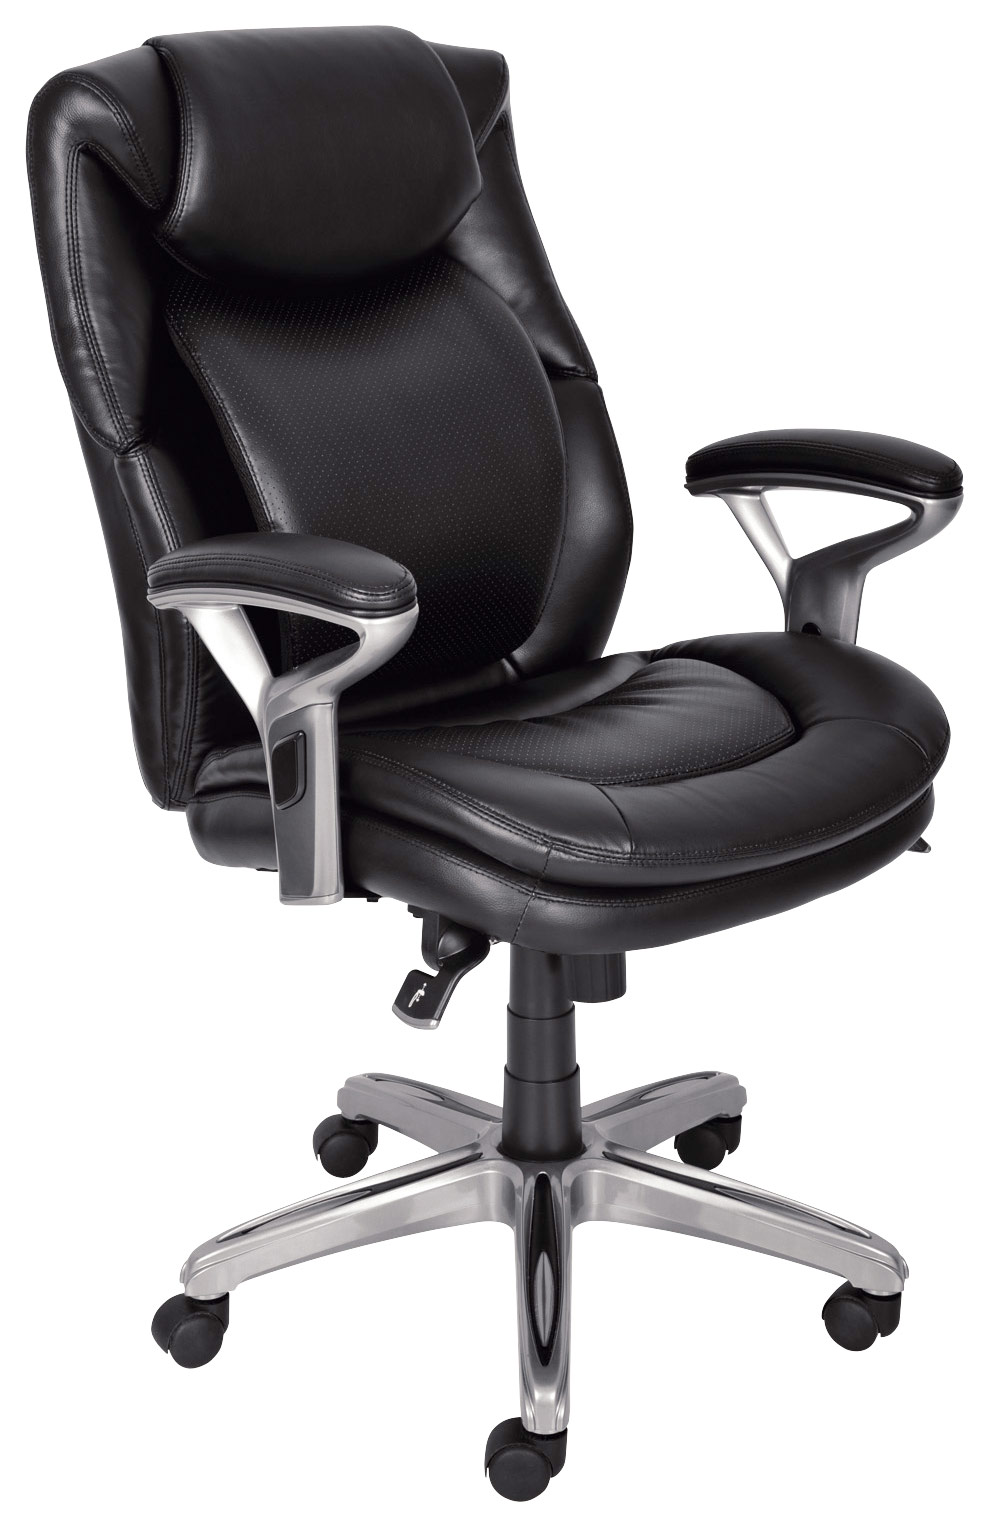 Angle View: Serta - AIR Health & Wellness Mid-Back Manager's Chair - Black